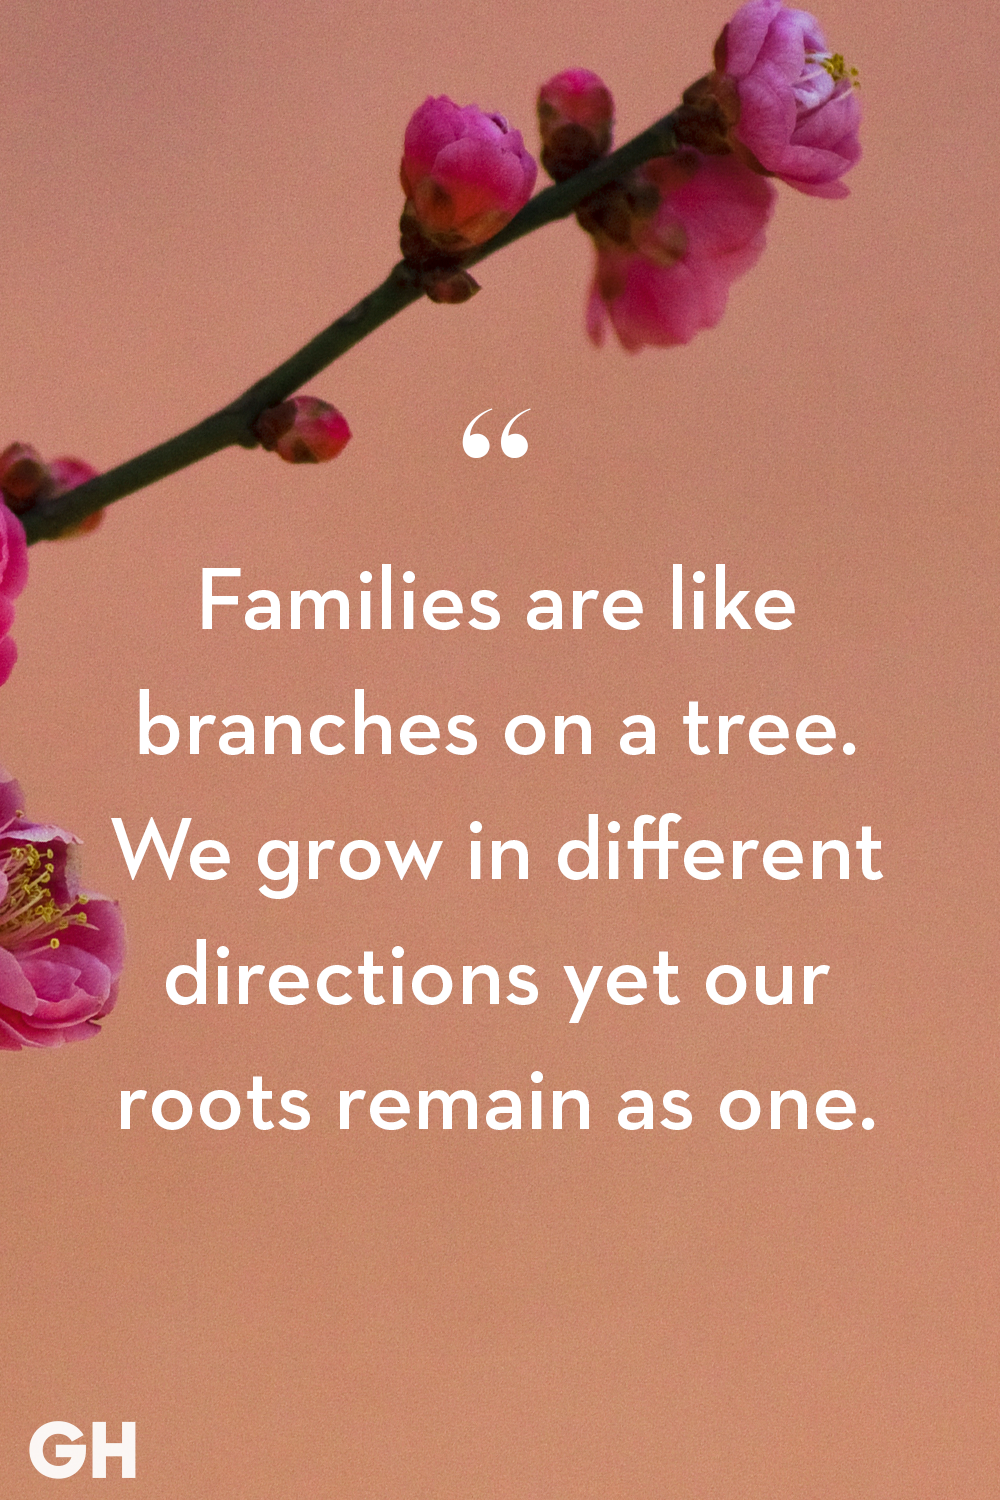 families are like branches on a tree. we grow in different directions yet our roots remain as one.